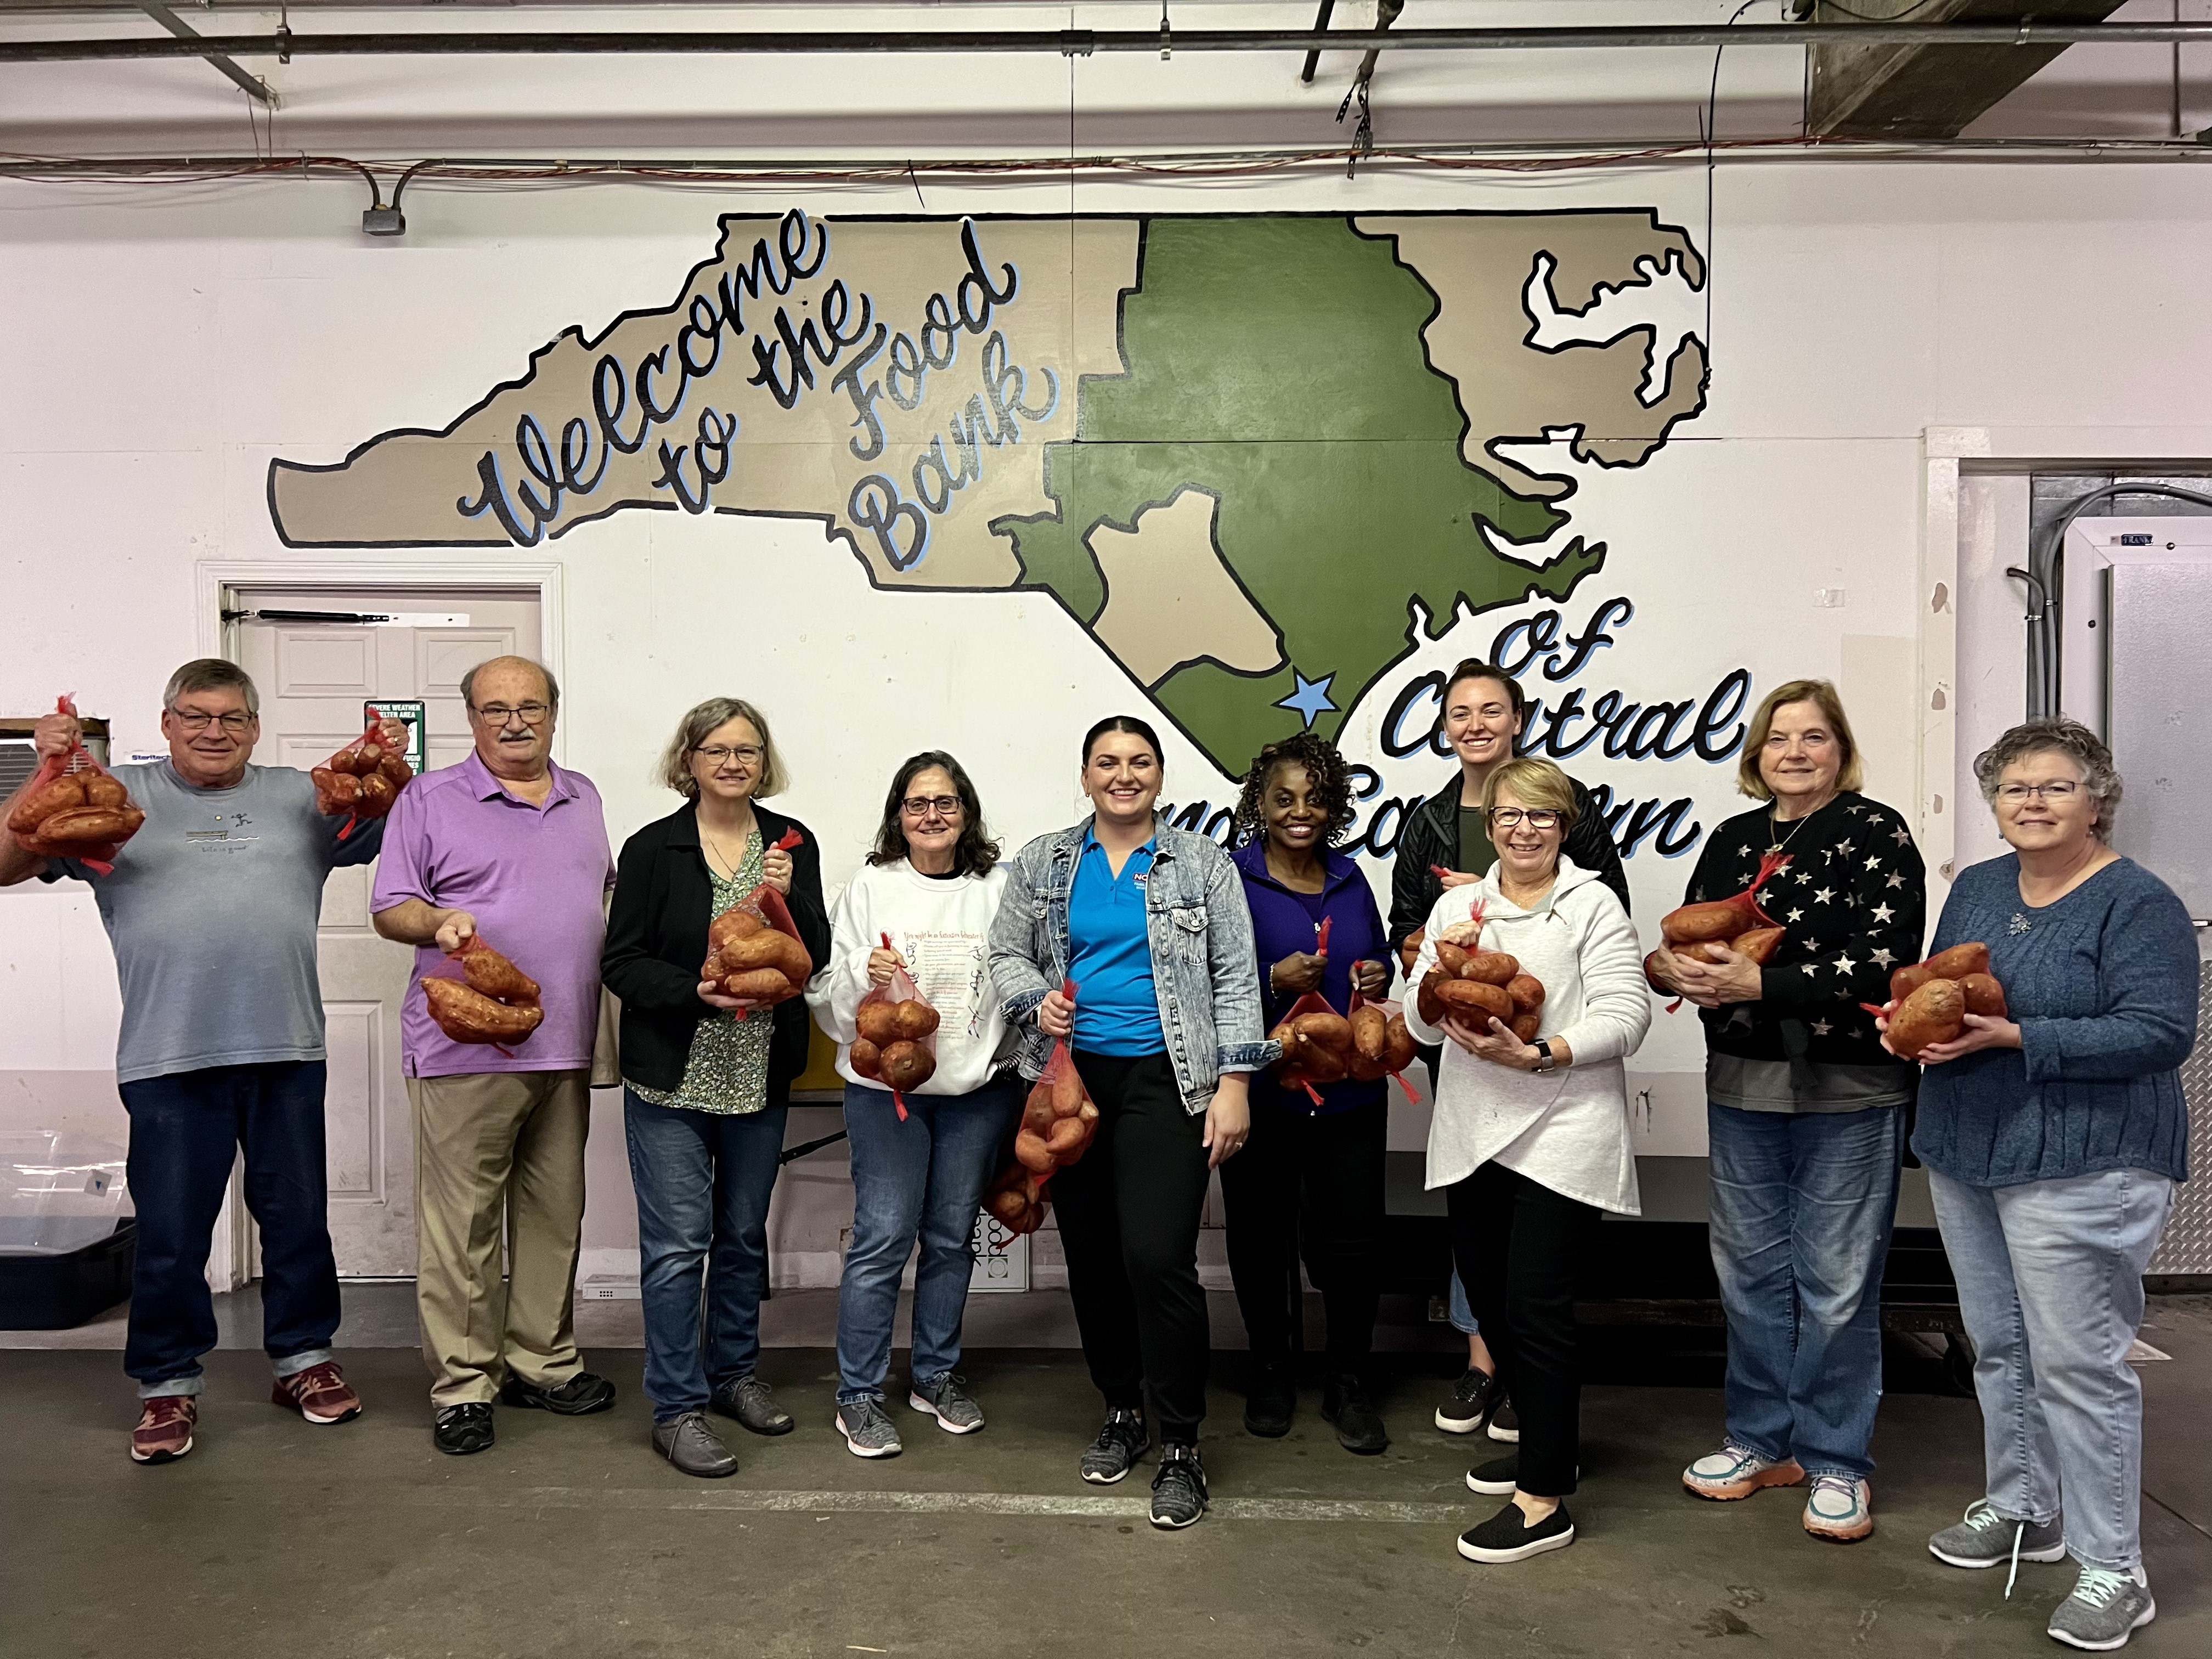 A group of people in front of a mural that reads "Welcome to the Food Bank of Central Carolina.